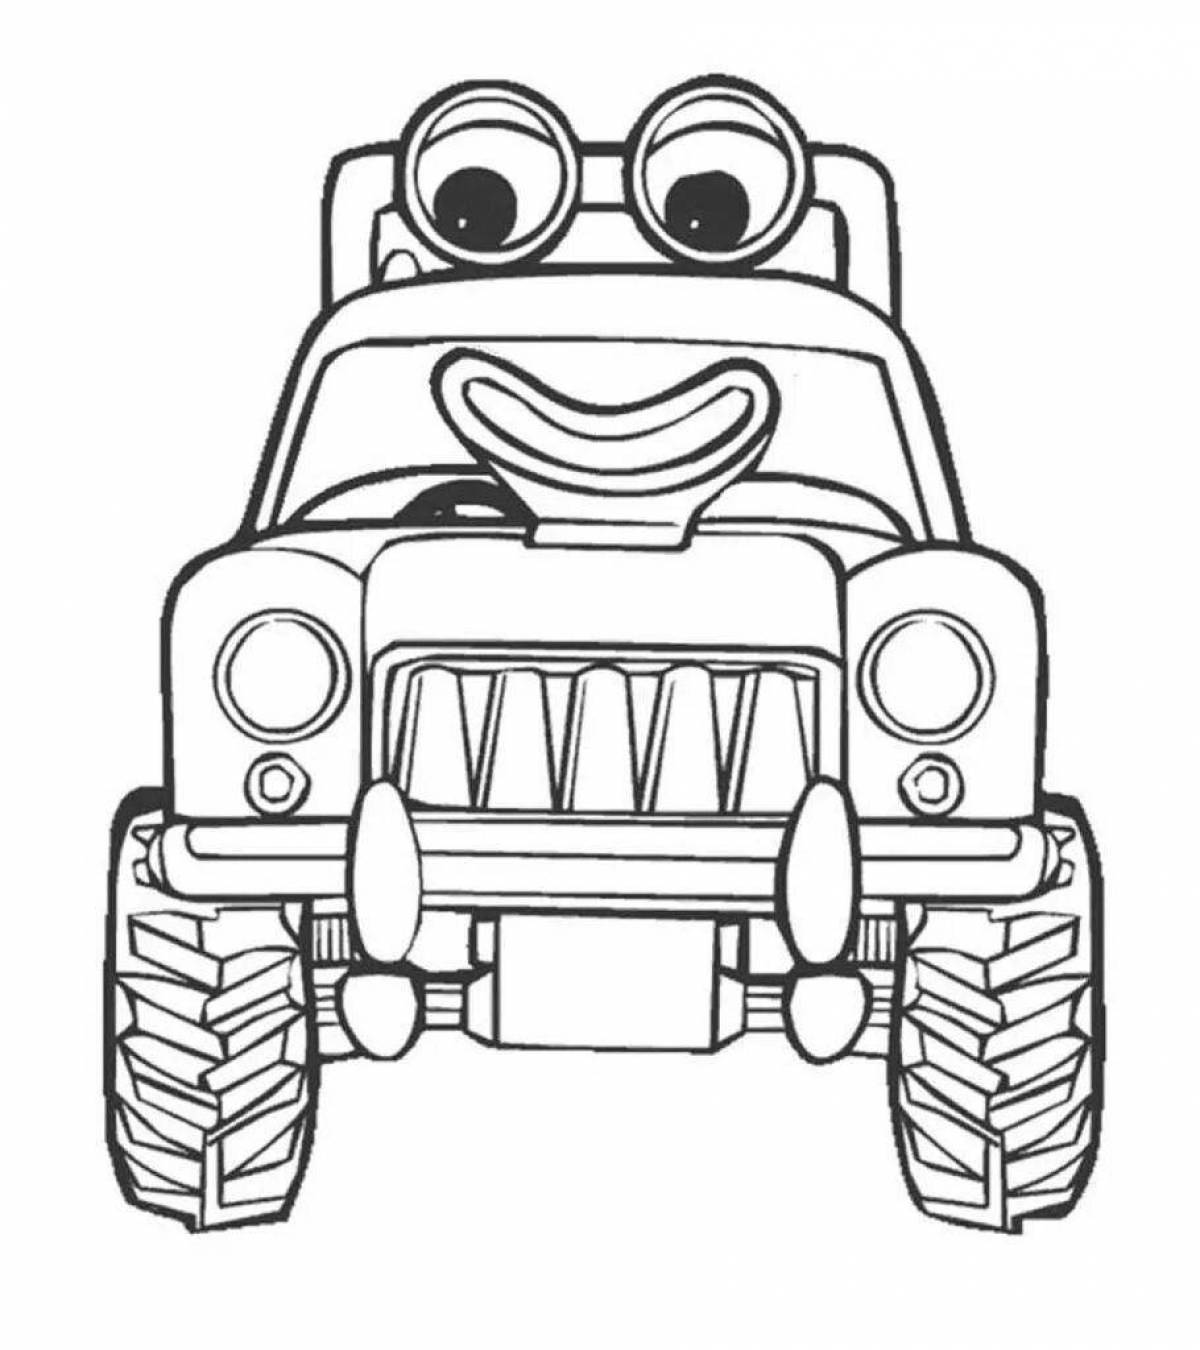 Playful tractor cartoon coloring page